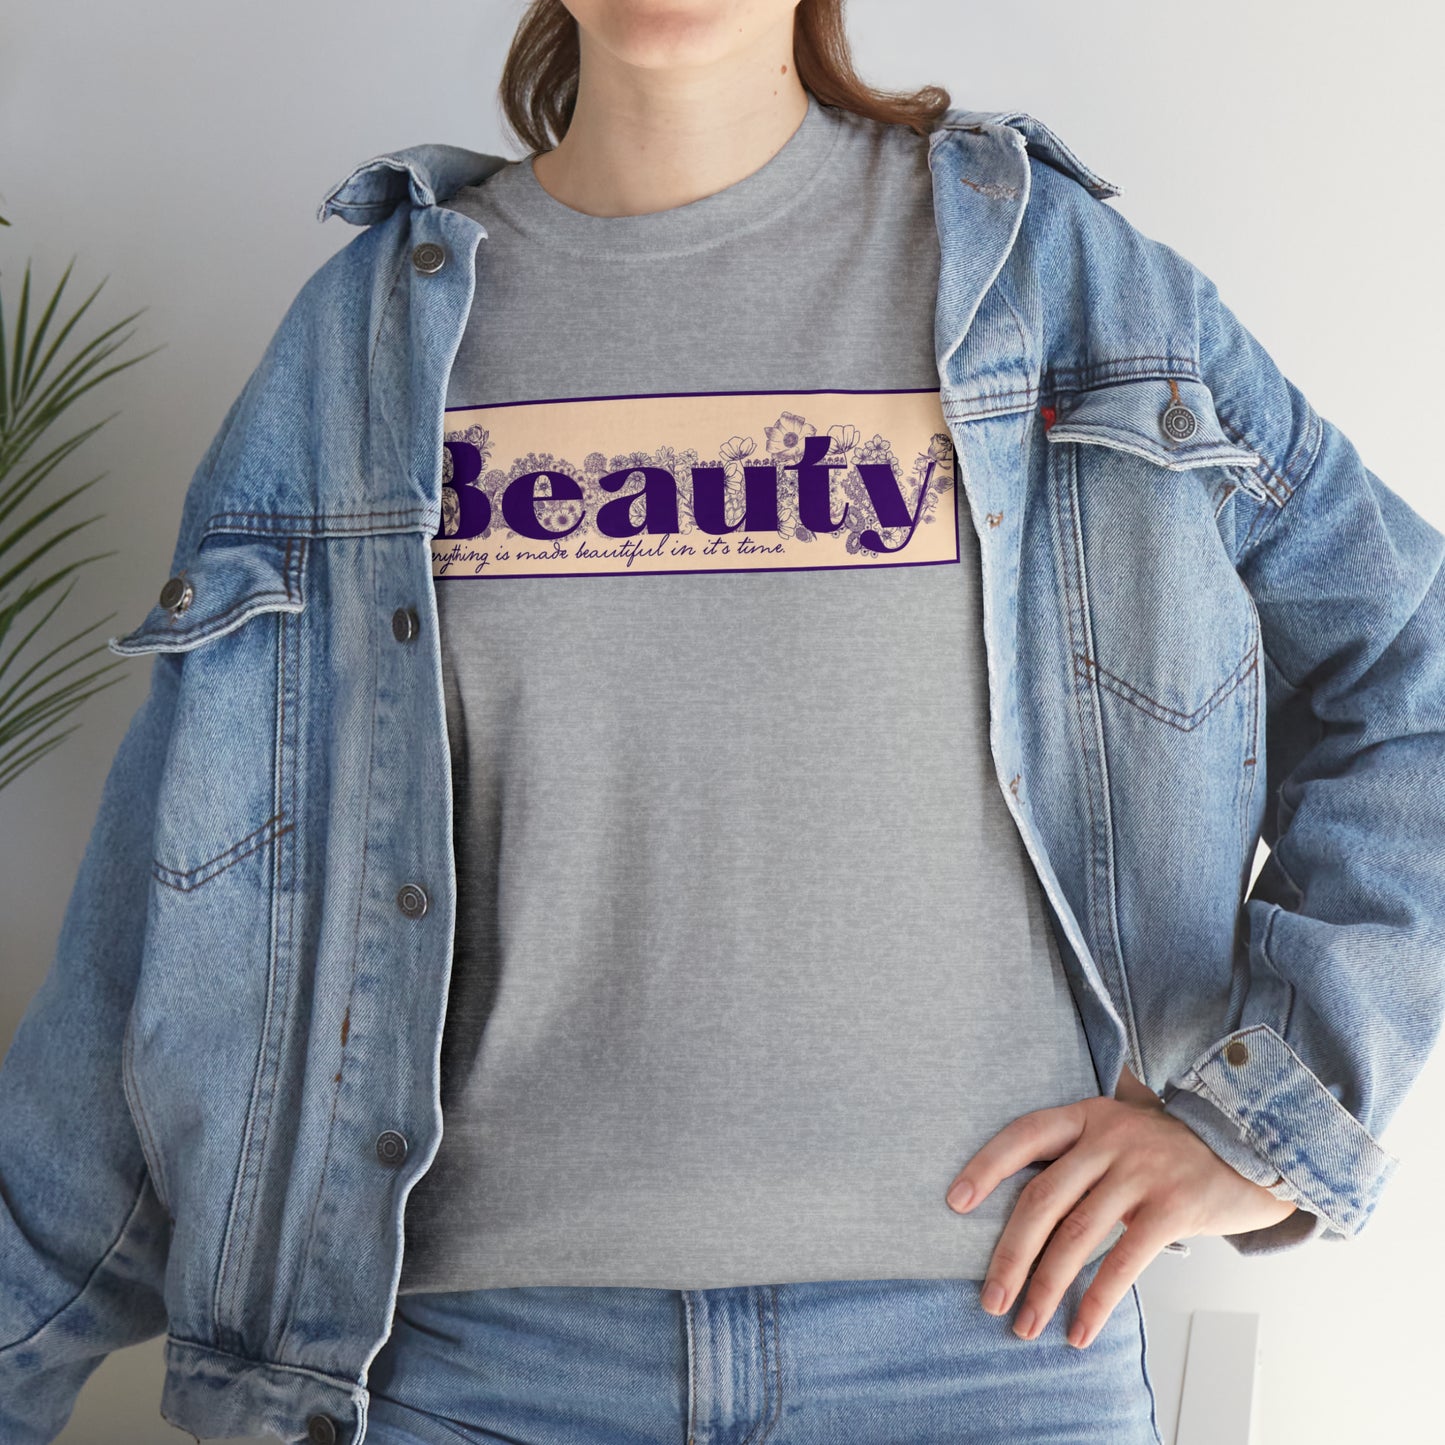 "Beauty" Cotton Graphic Tee - Everything Hyssop & Honey